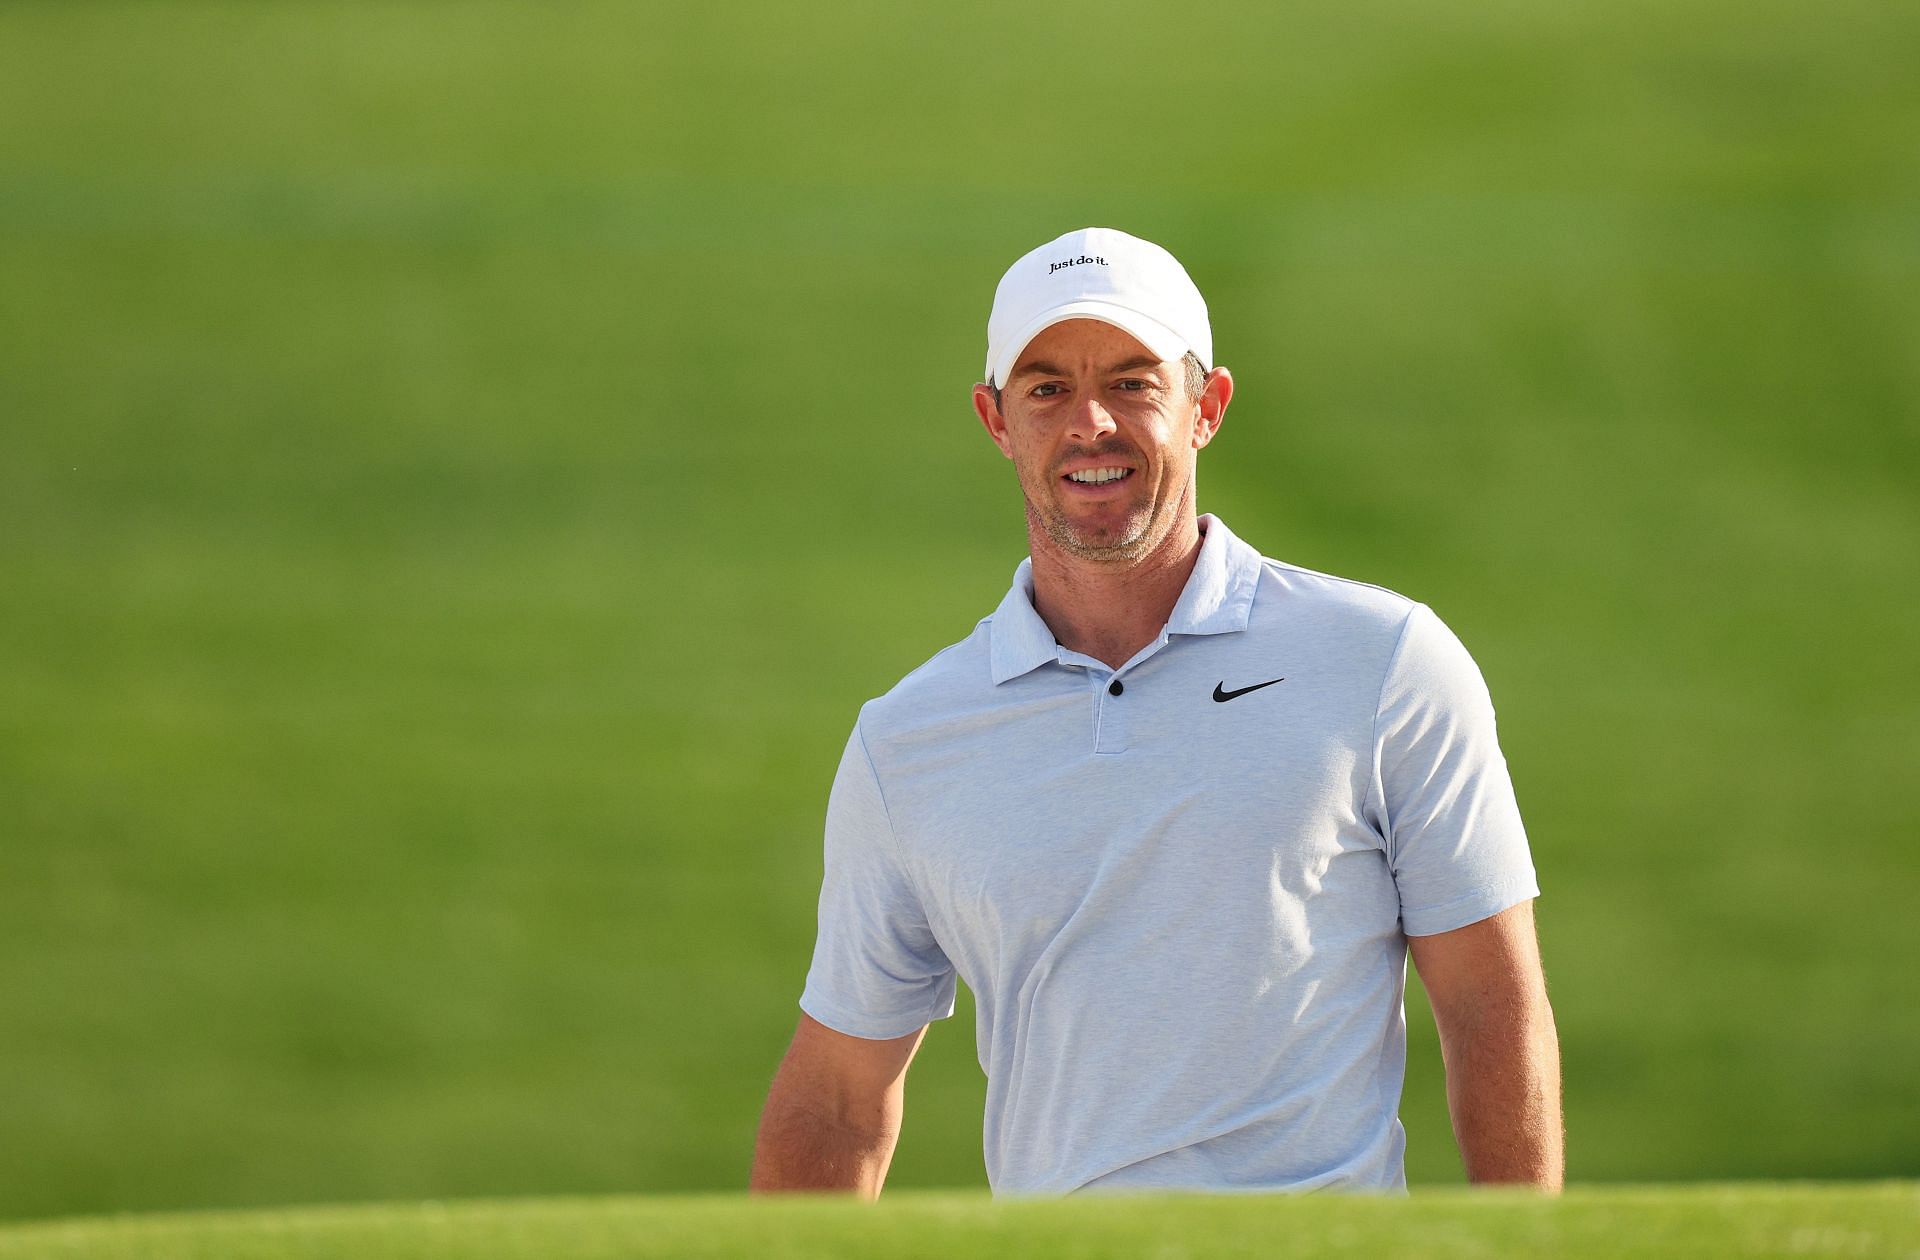 Rory McIlroy is playing the Wells Fargo Championship this weekend